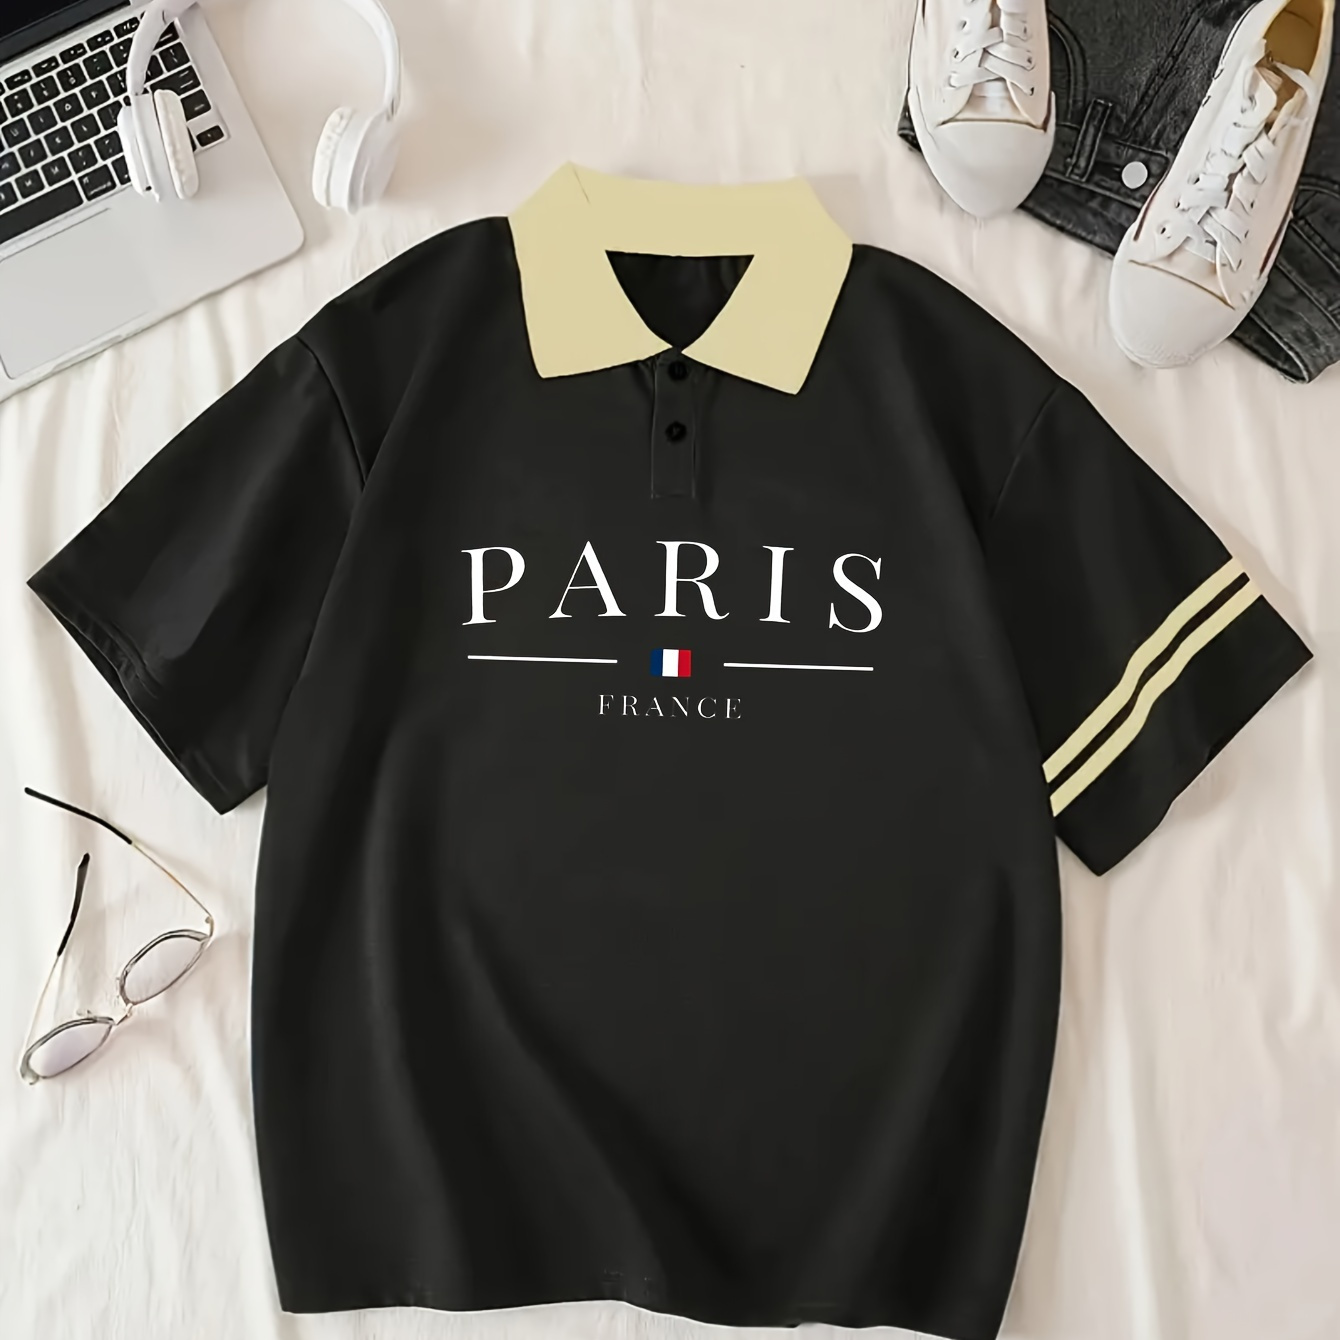 

Women's Casual Sports Polo Shirt With French Flag Design, Fashionable Short Sleeve Top With Contrast Stripes